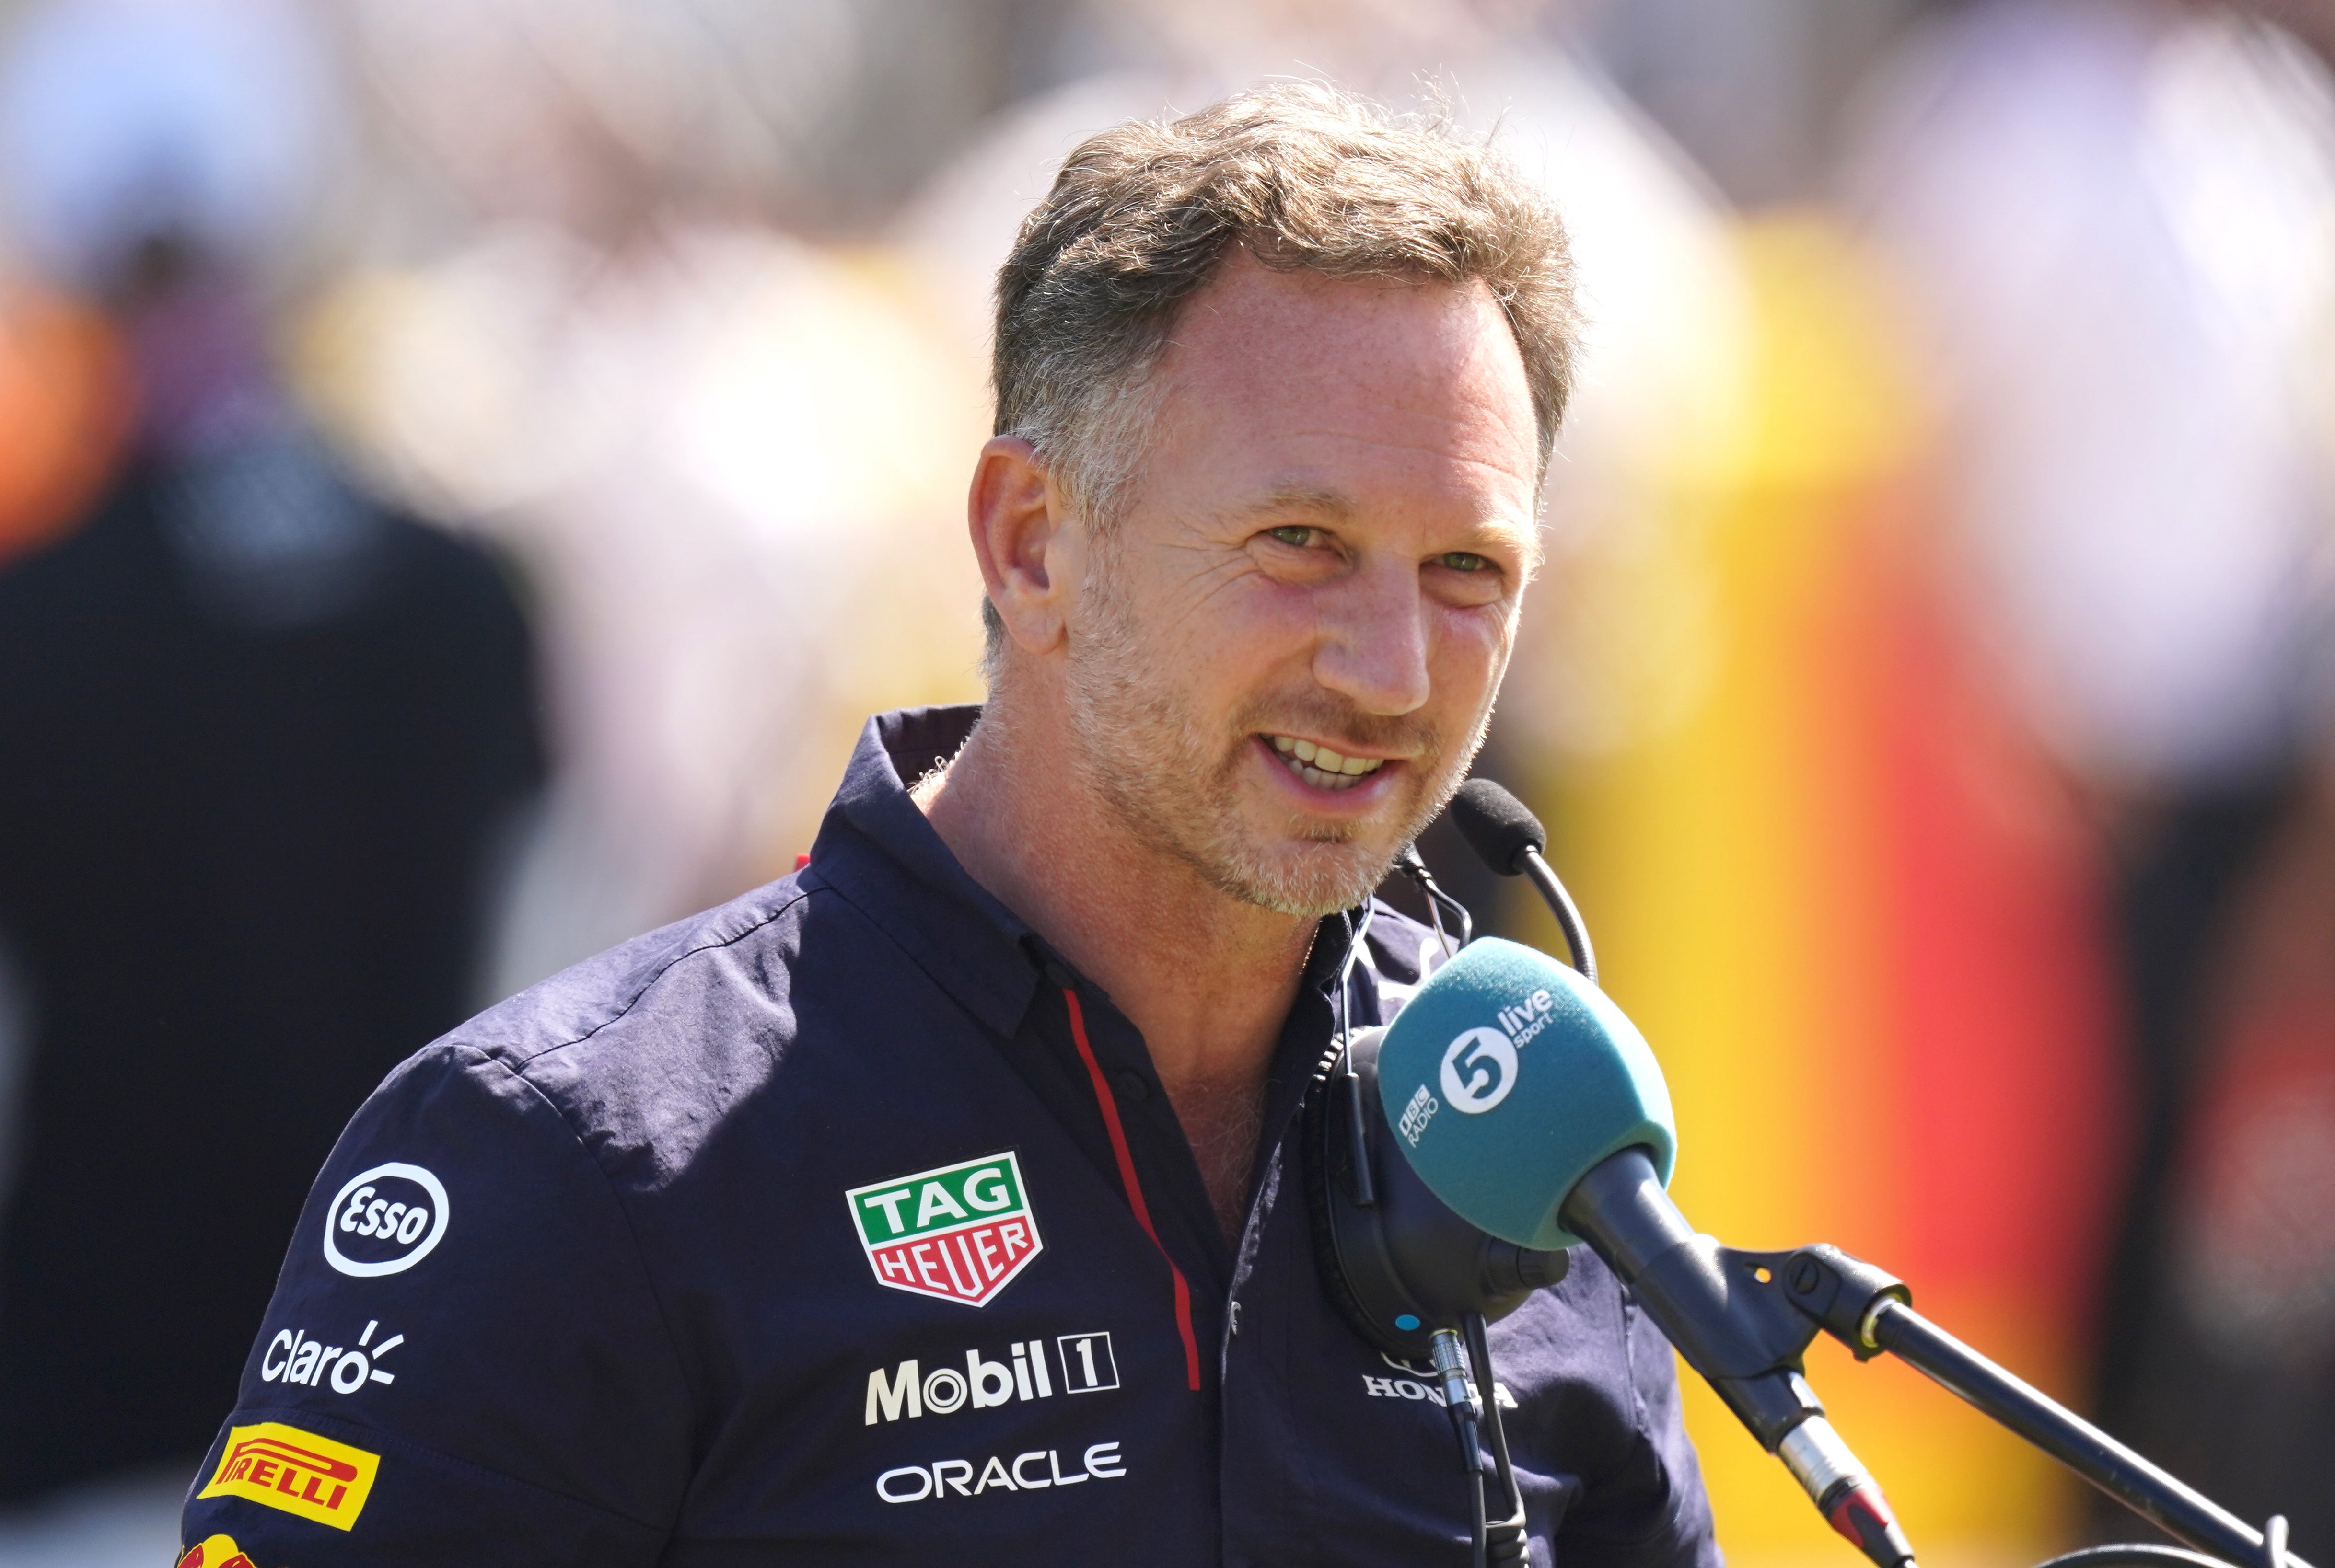 Christian Horner was summoned to the stewards after a pre-race television interview (Tim Goode/PA)